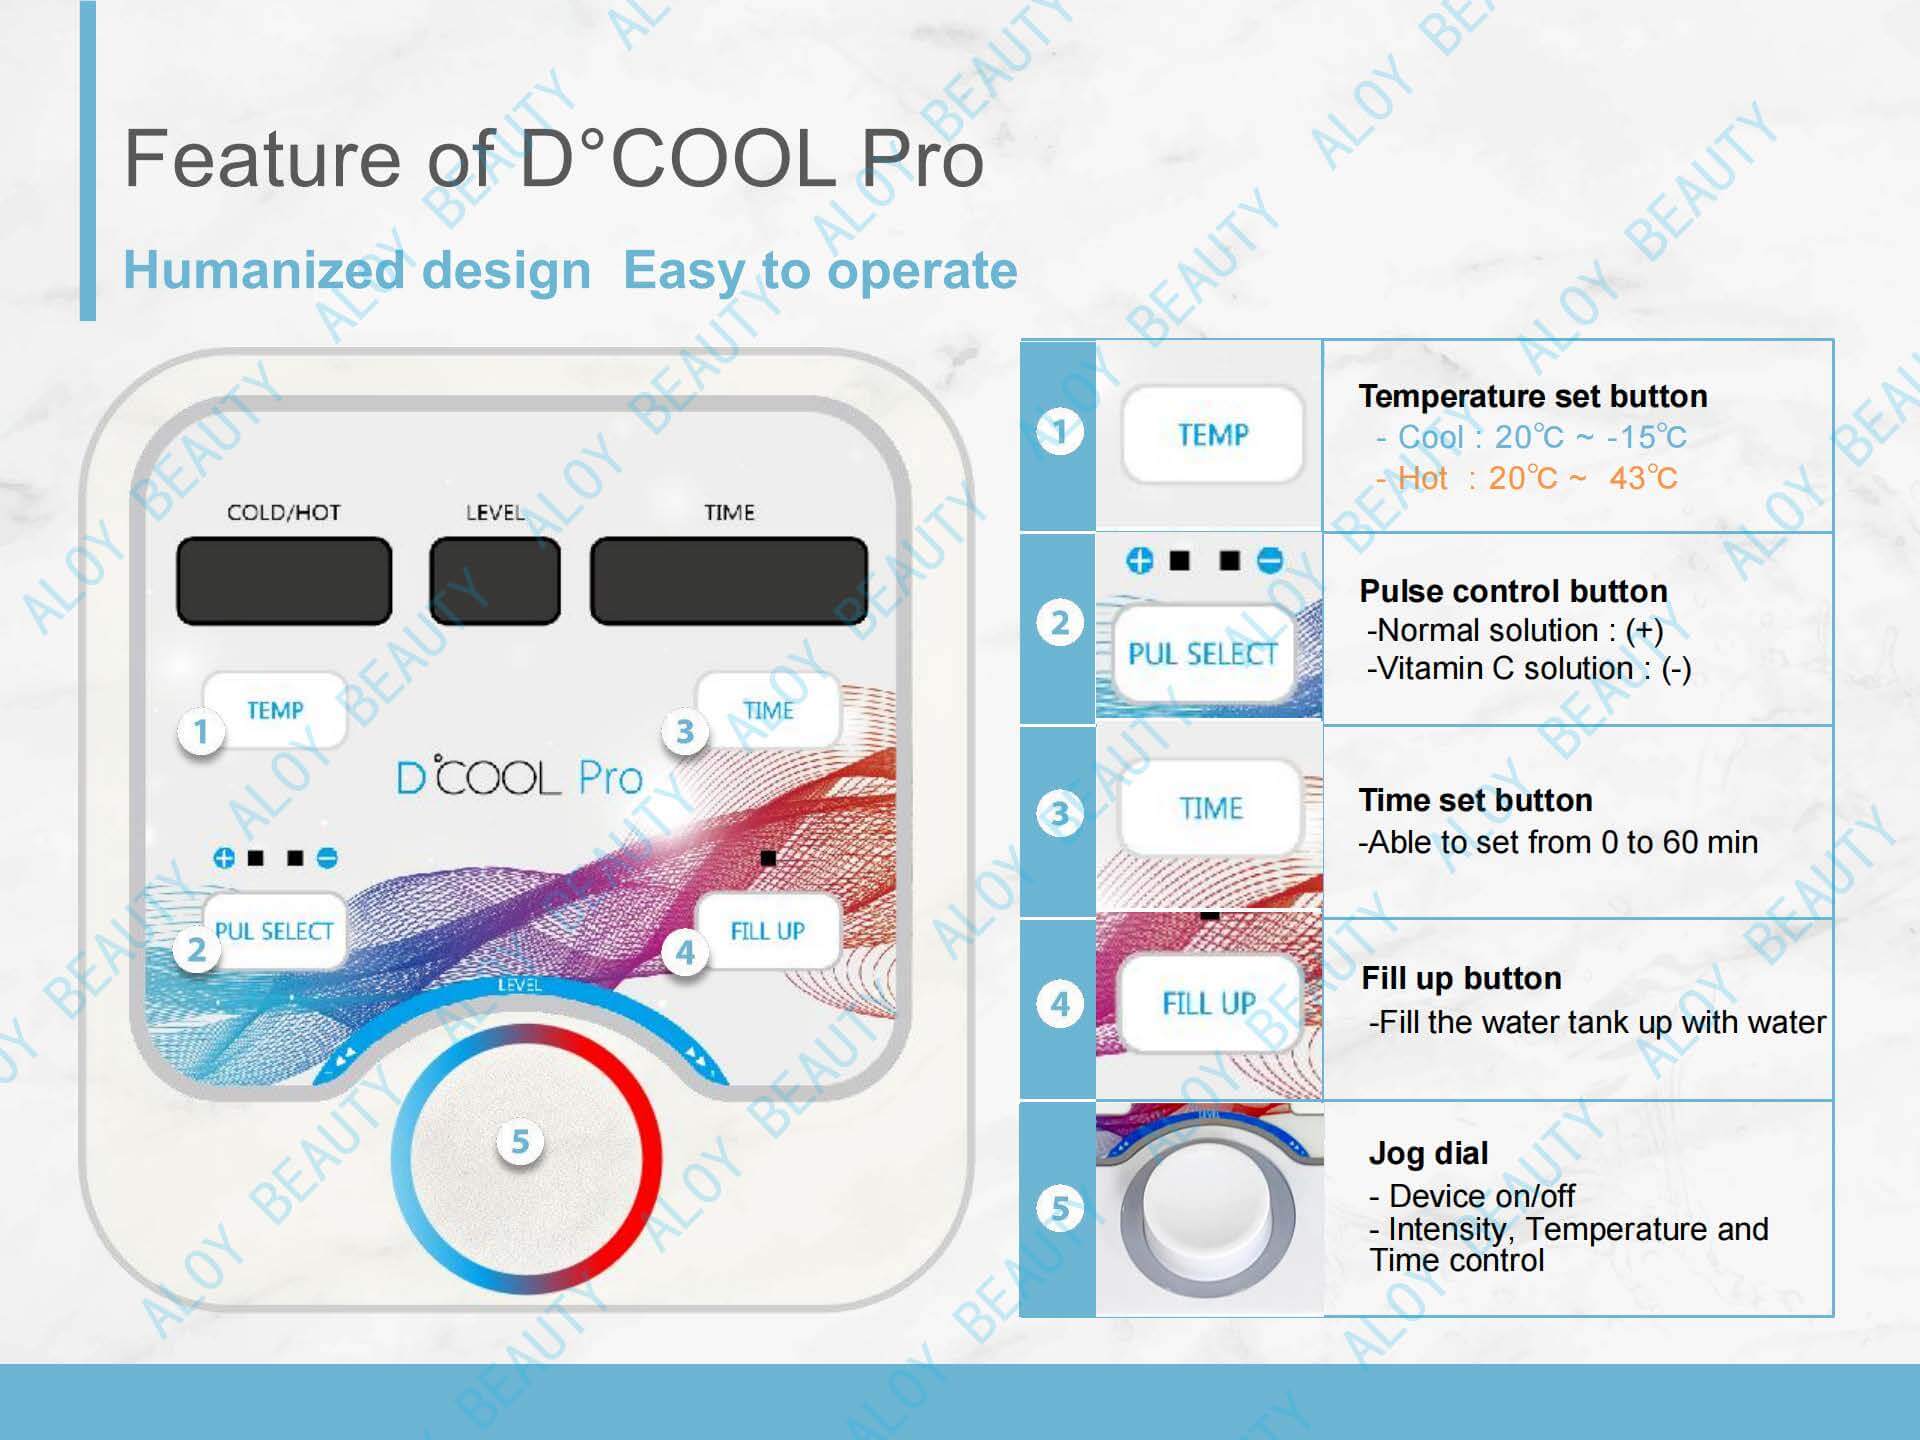 The Newest Upgrade D°COOL with Blue & Red-Light D°COOL Pro